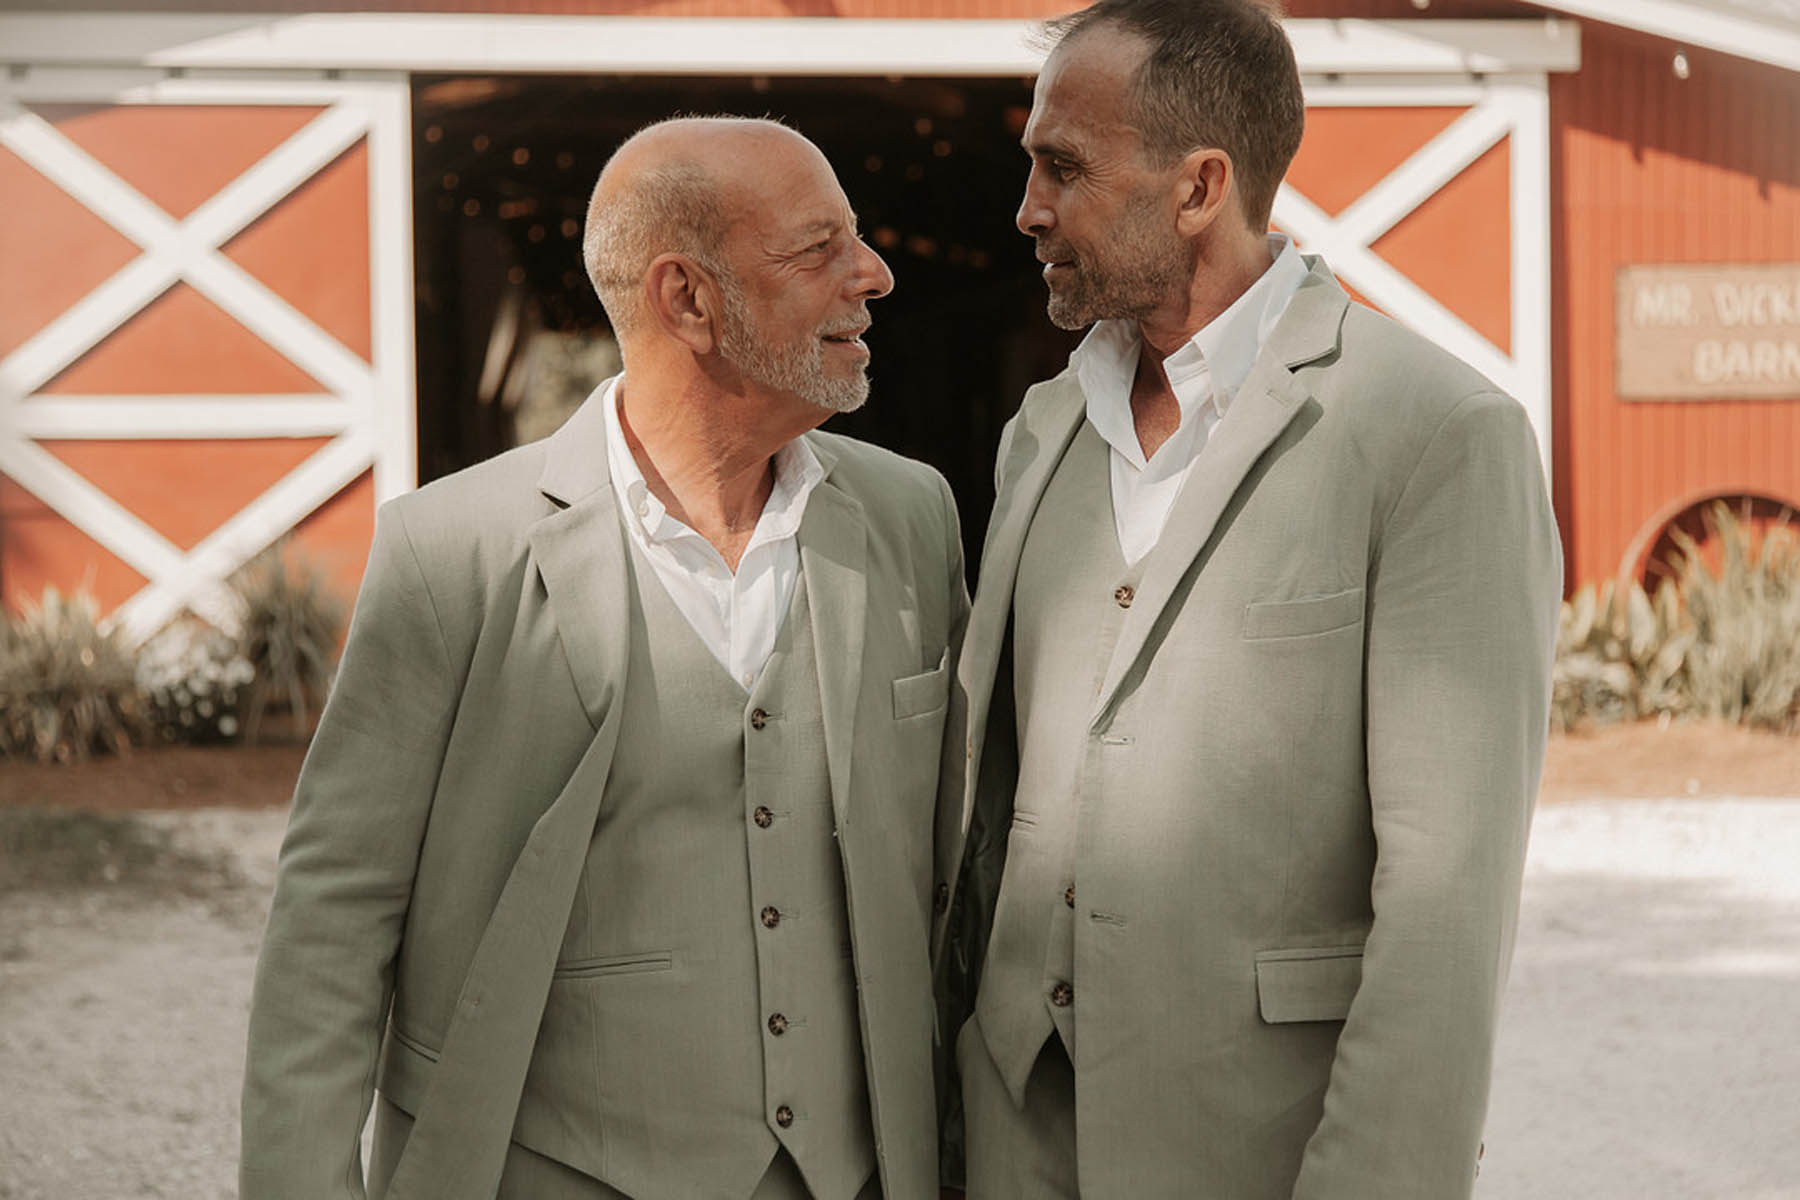 Two grooms in sage gray suits stand in front of an open red barn, smiling at each other